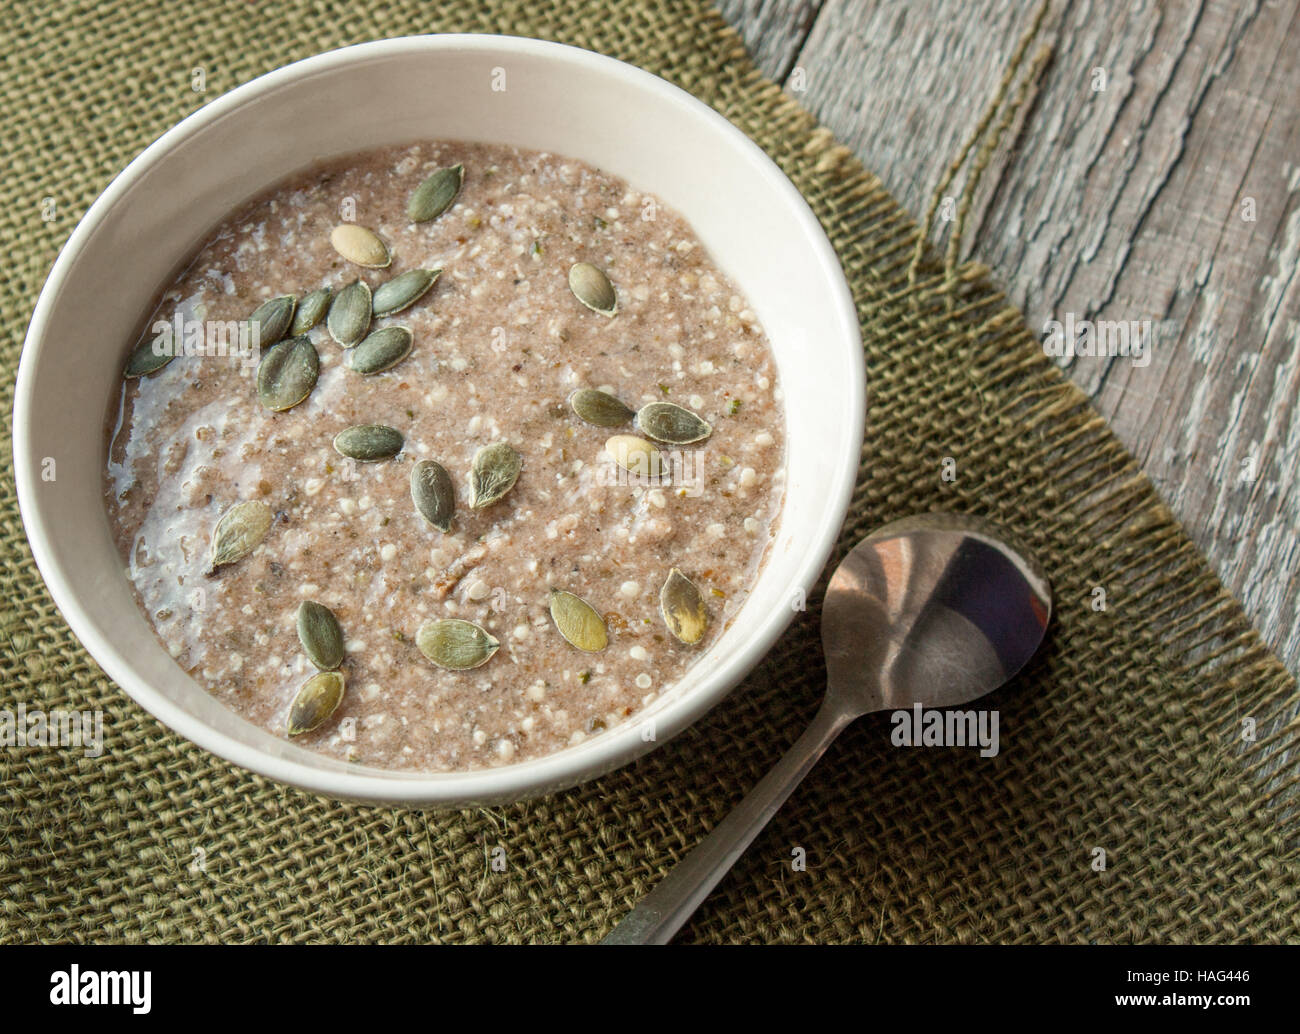 Very healthy porridge hemp linen with seaweed. Perfect for the detox diet or just a healthy meal.  Love for a healthy raw food concept. Stock Photo